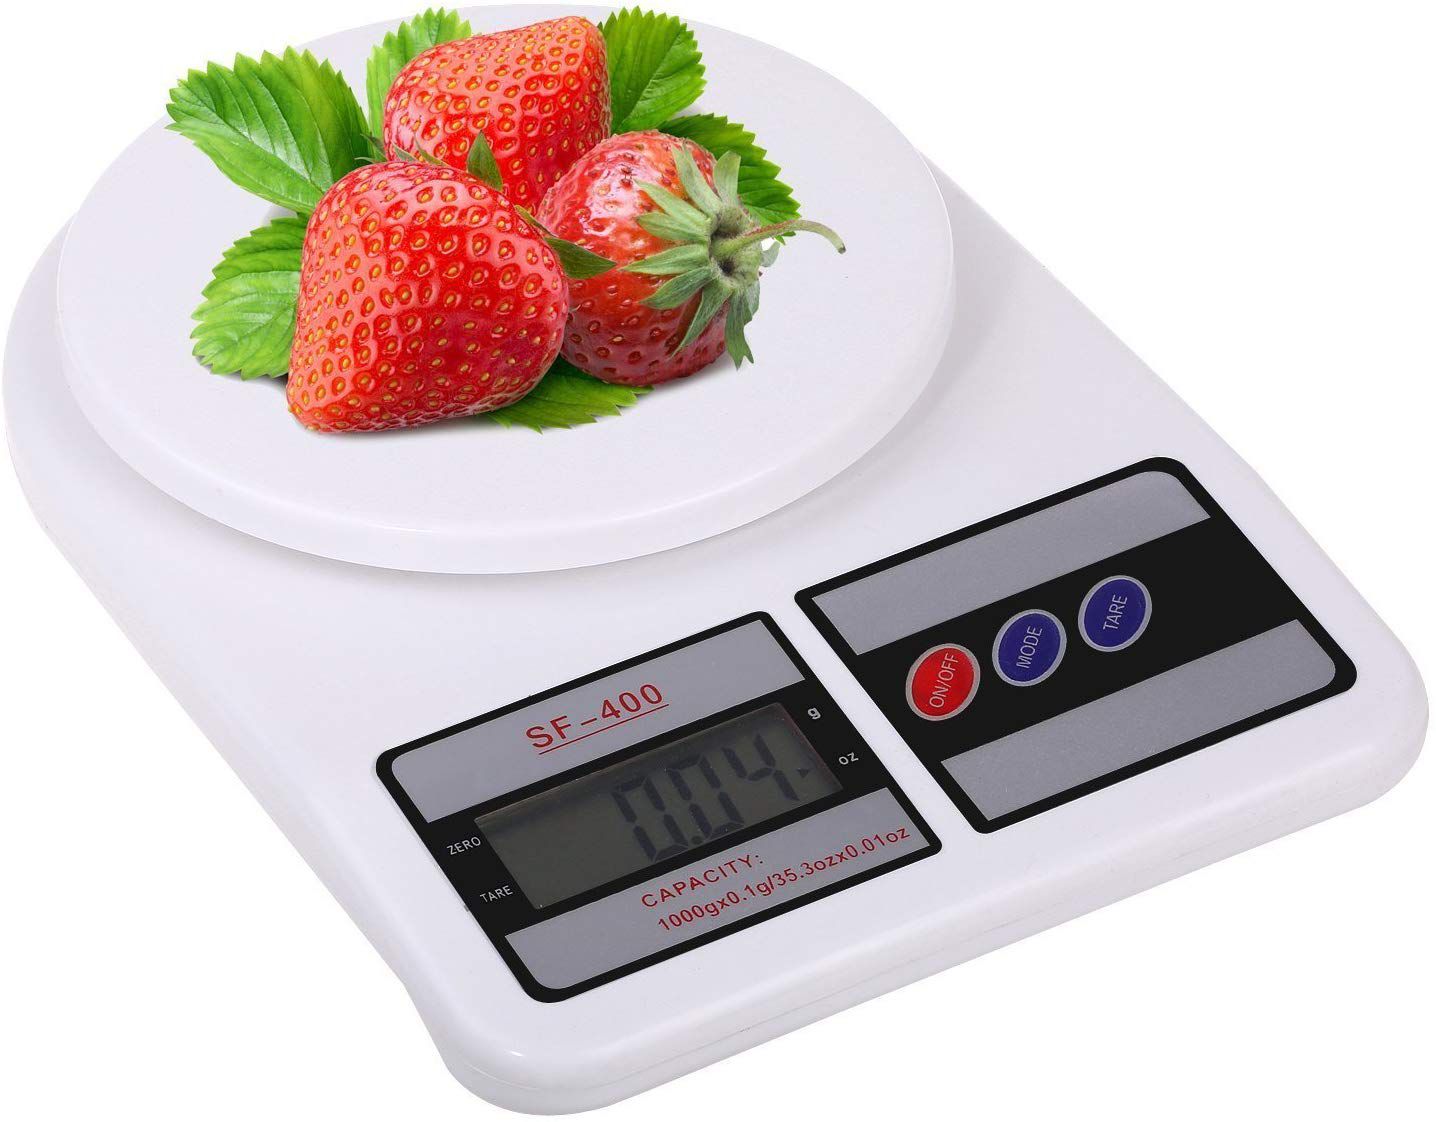 TOPINCN Weight Scale Multifunction Portable Electronic 10kg/1g Digital Small Pet Cats Dogs Measure Tool Kitchen Scale 